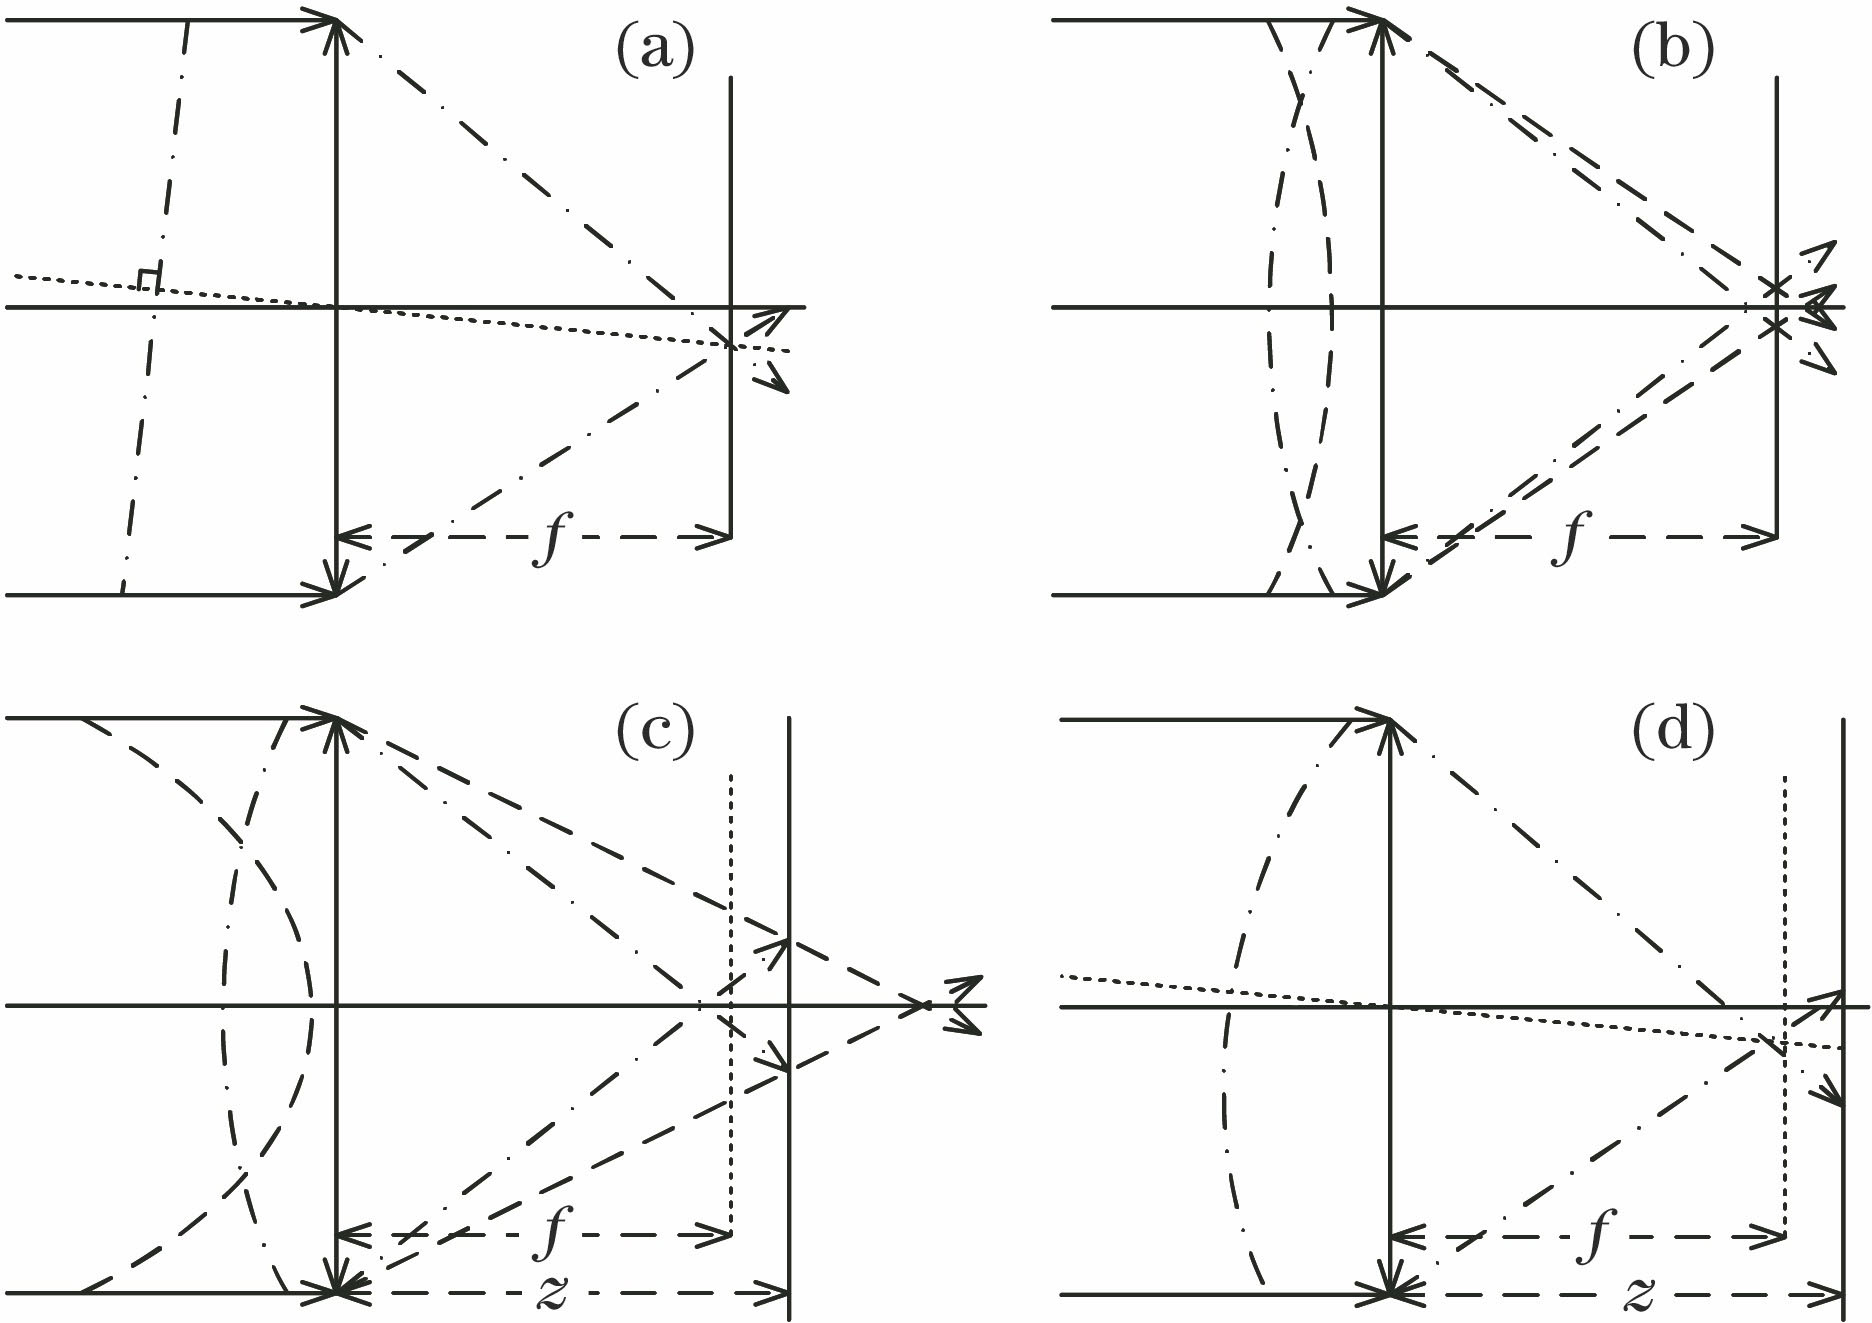 Conceptual schematics for a single microlens sensing inclined wavefront and curved wavefront. (a) Inclined wavefront on the focal plane; (b) curved wavefront on the focal plane; (c) curved wavefront on a defocused plane; (d) both inclined wavefront and curved wavefront on a defocused plane